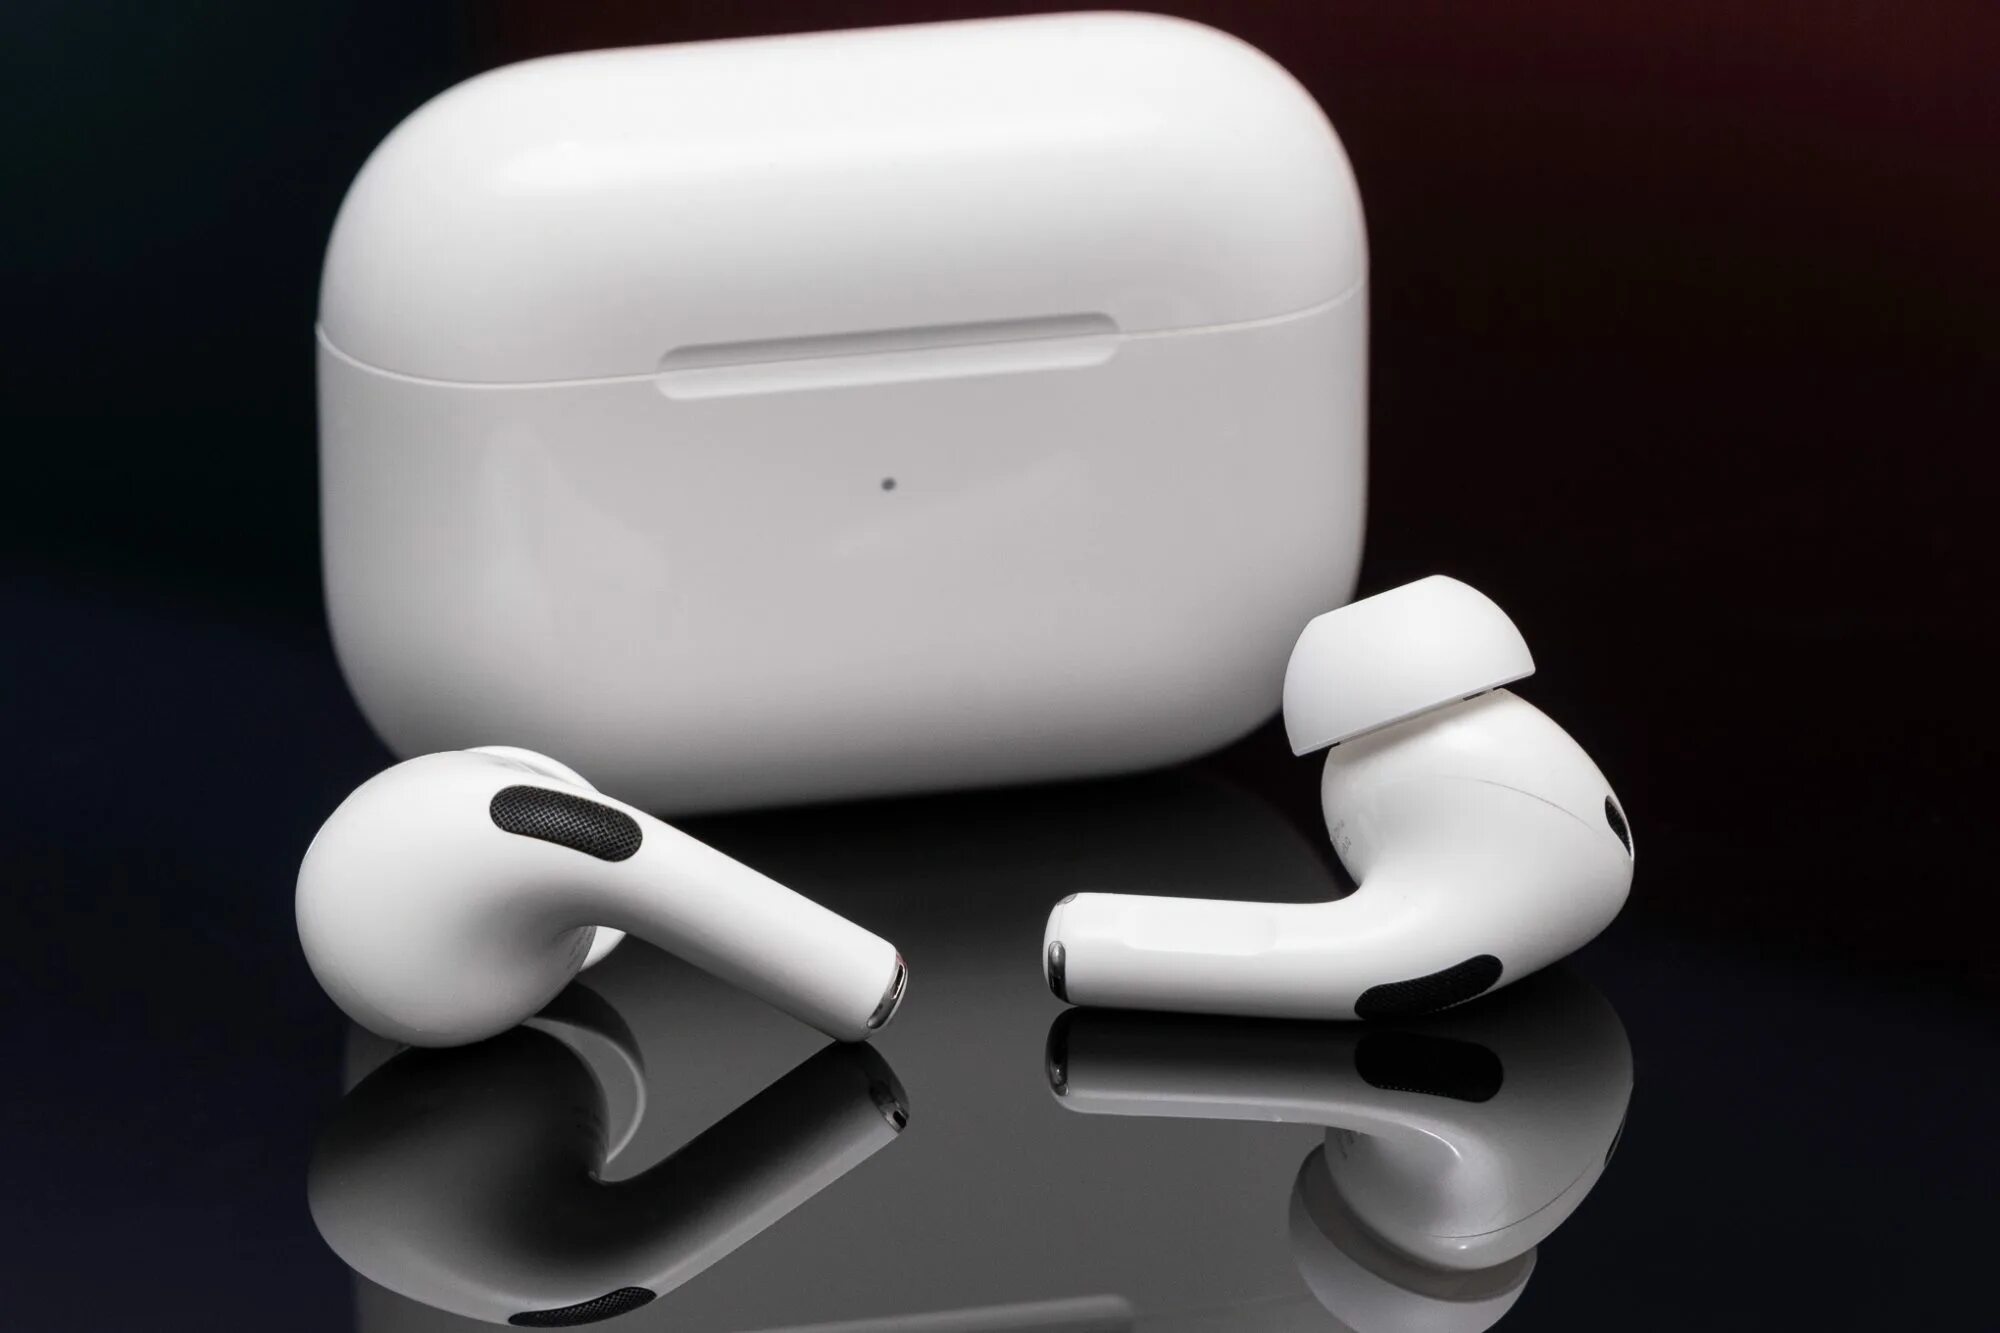 Airpods страны. Apple AIRPODS 2. Apple AIRPODS Pro 2. Наушники Apple AIRPODS Pro 2nd Generation. Apple AIRPODS 2 (2:1).